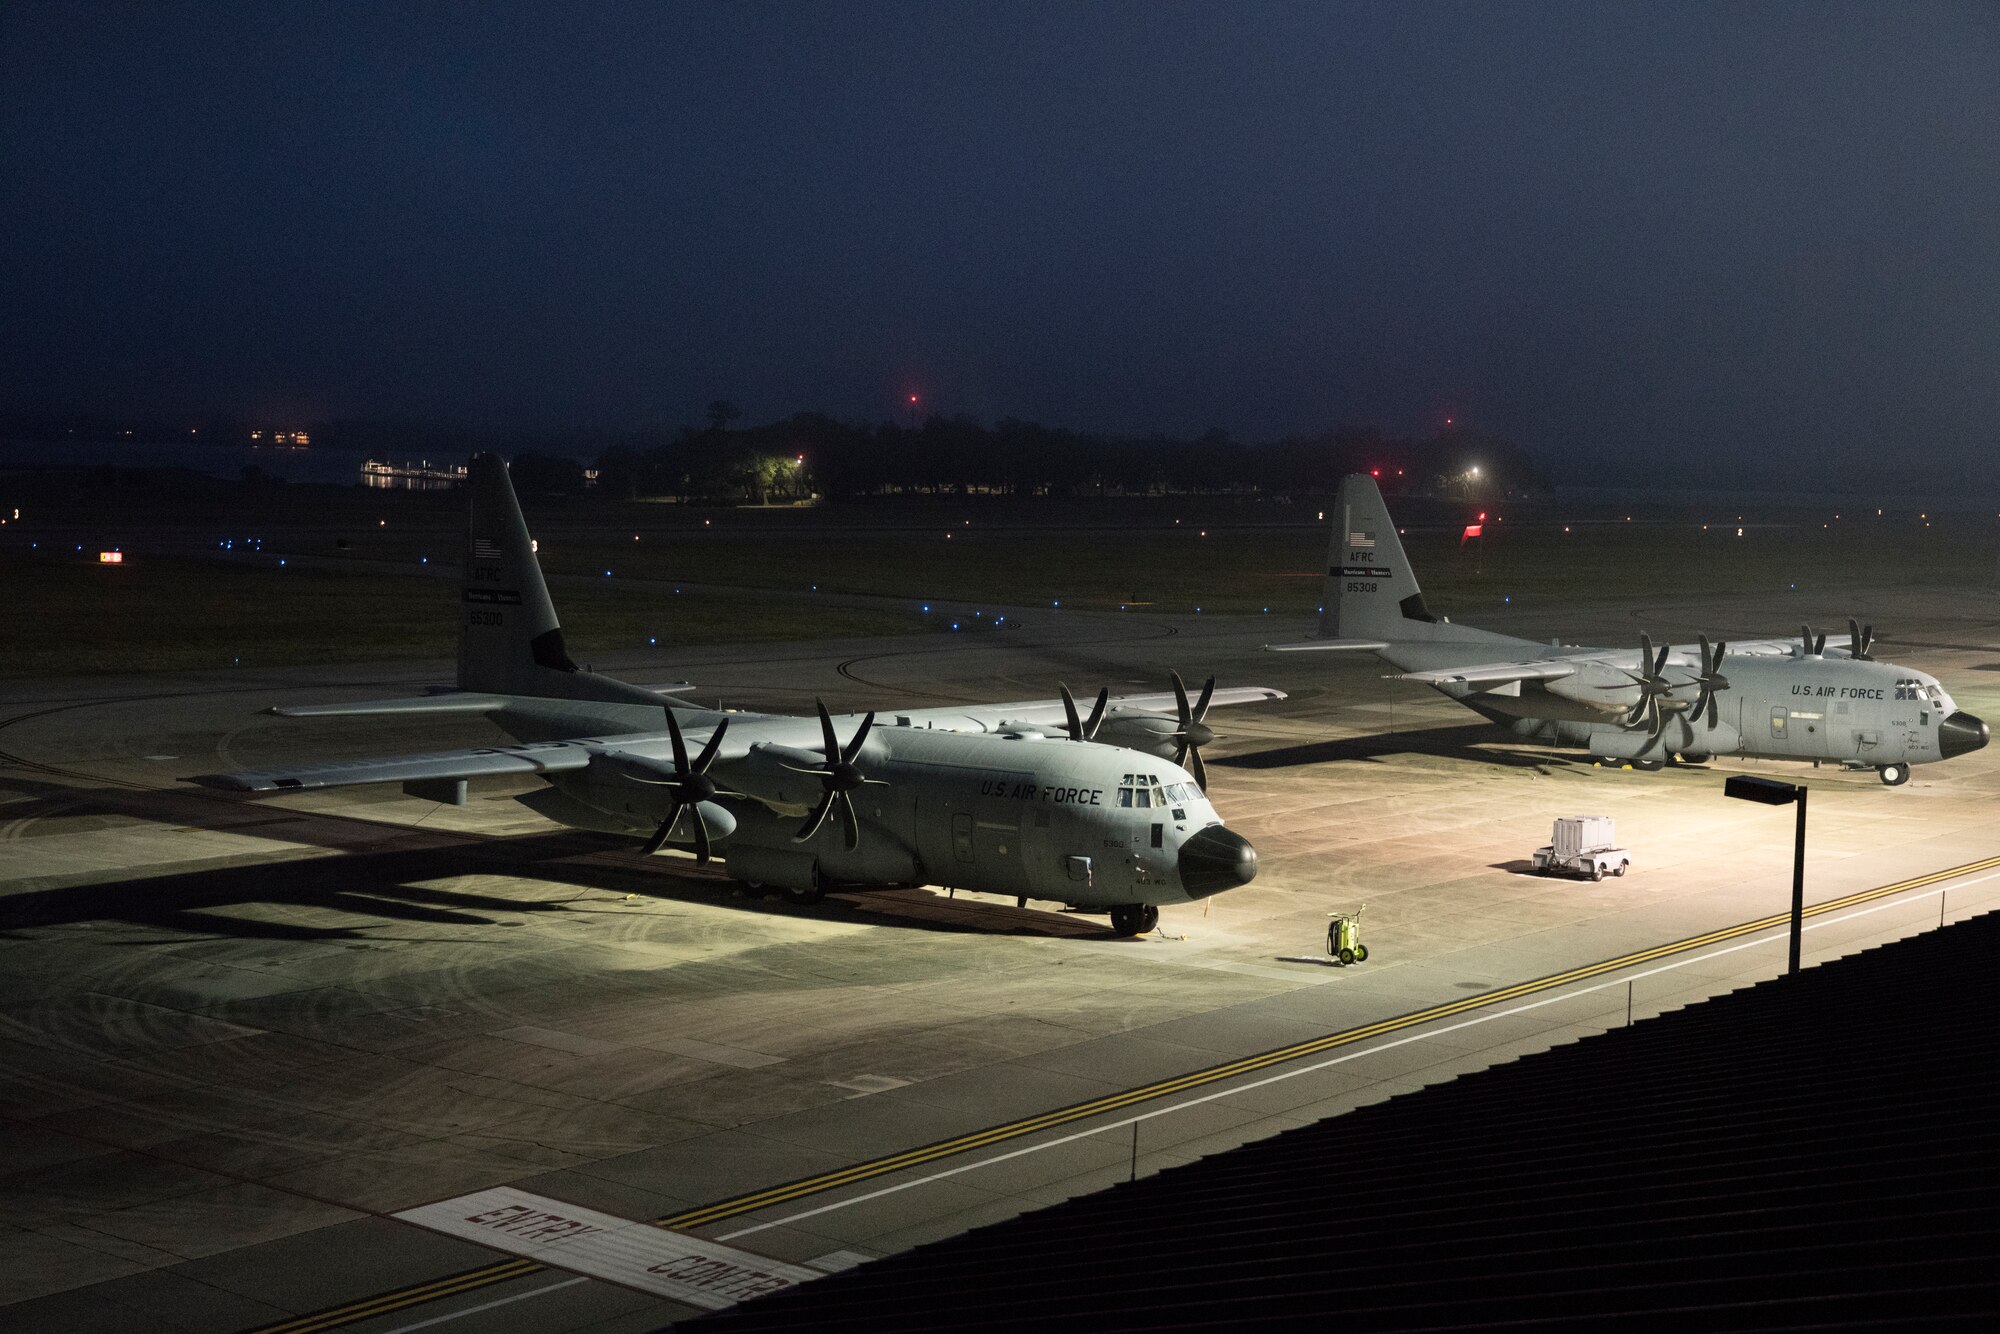 WC-130J Super Hercules aircraft from the 53rd Weather Reconnaissance Squadron sit on the flightline May 16, at Keesler Air Force Base, Miss. The Hurricane Hunters departed today on their first storm tasking of the 2020 Atlantic hurricane season to investigate an area for possible development into a tropical depression or storm near the Bahamas. (U.S. Air Force photo by Tech. Sgt. Christopher Carranza)